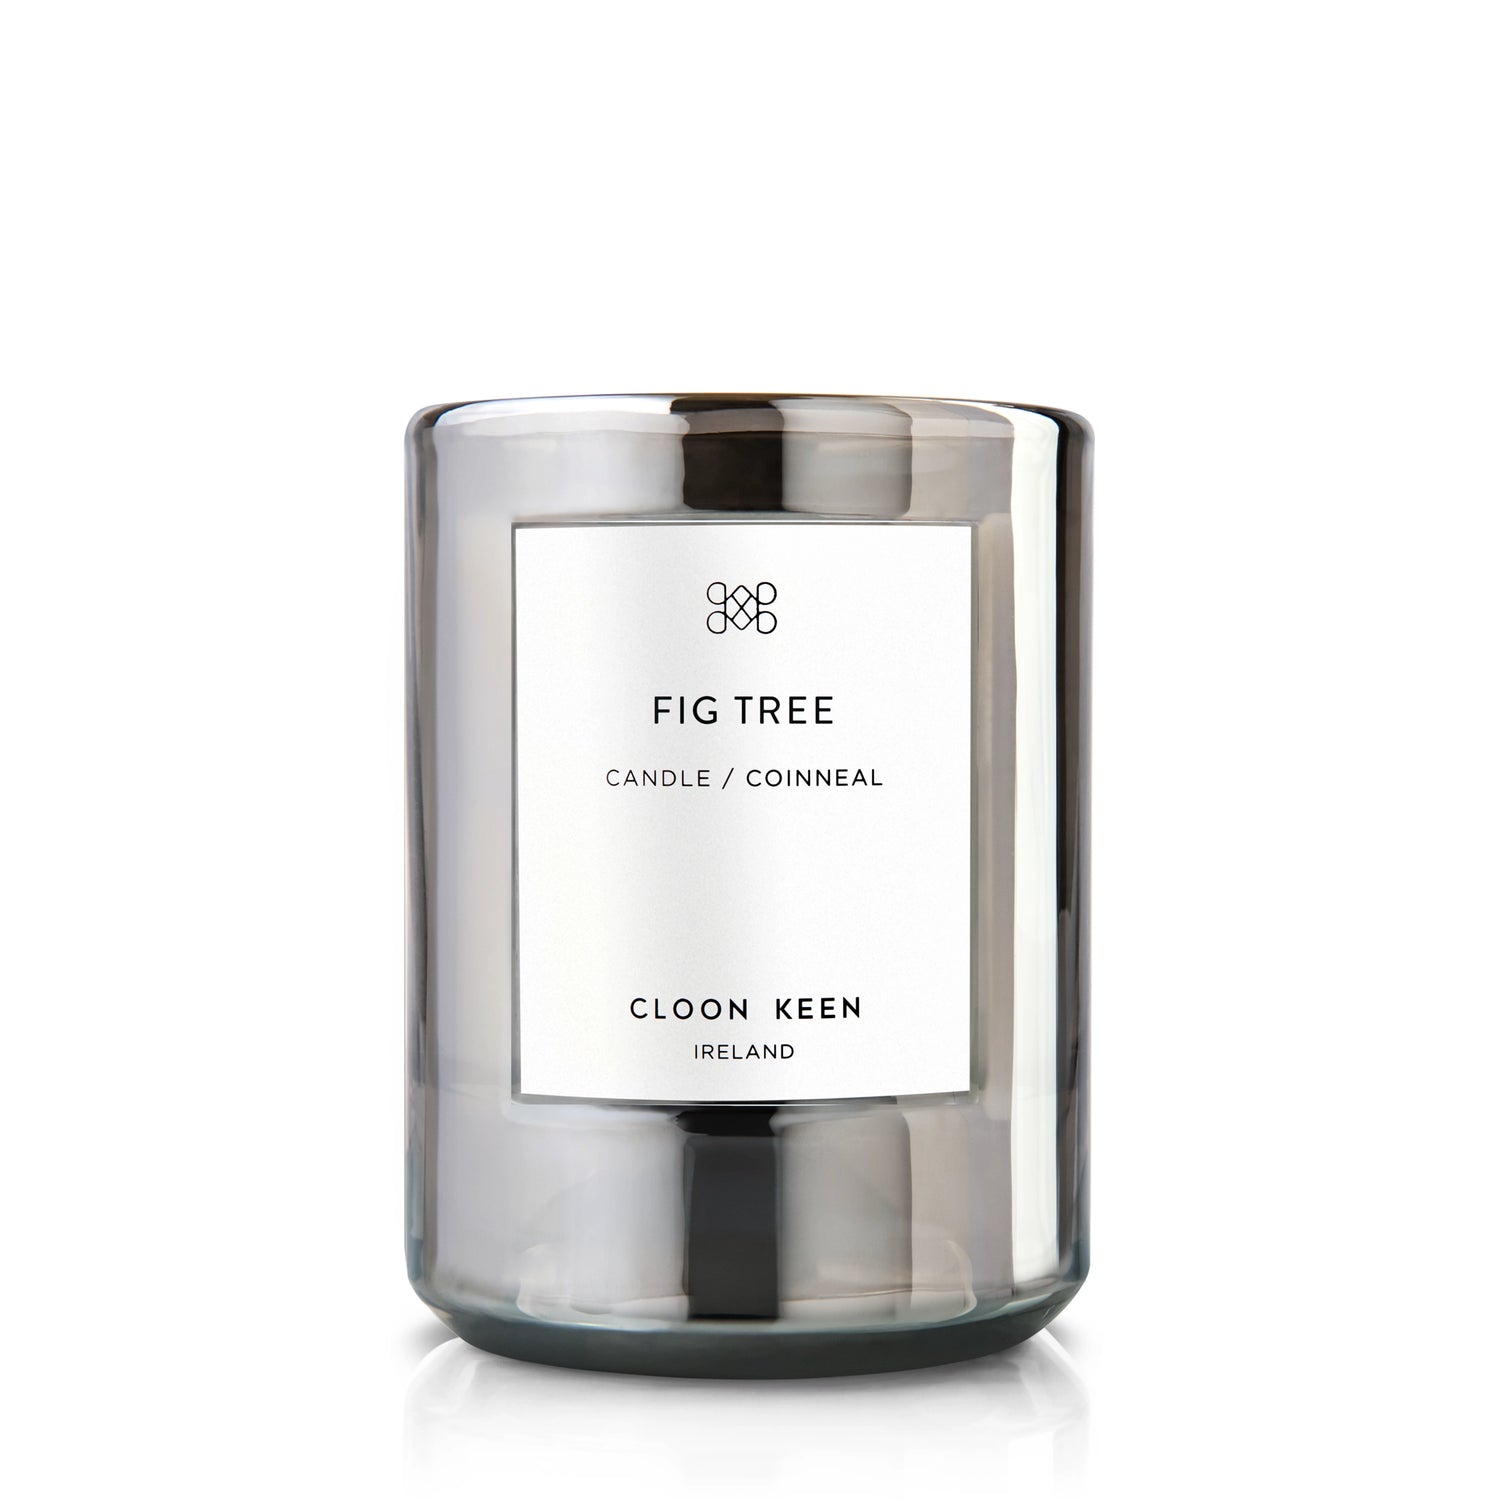 Discover Cloon Keen Fig Tree candle. Inspired by local folklore, Fig Tree has floral notes with plummy sweetness. Woods with golden amber evoke fig tree bark.